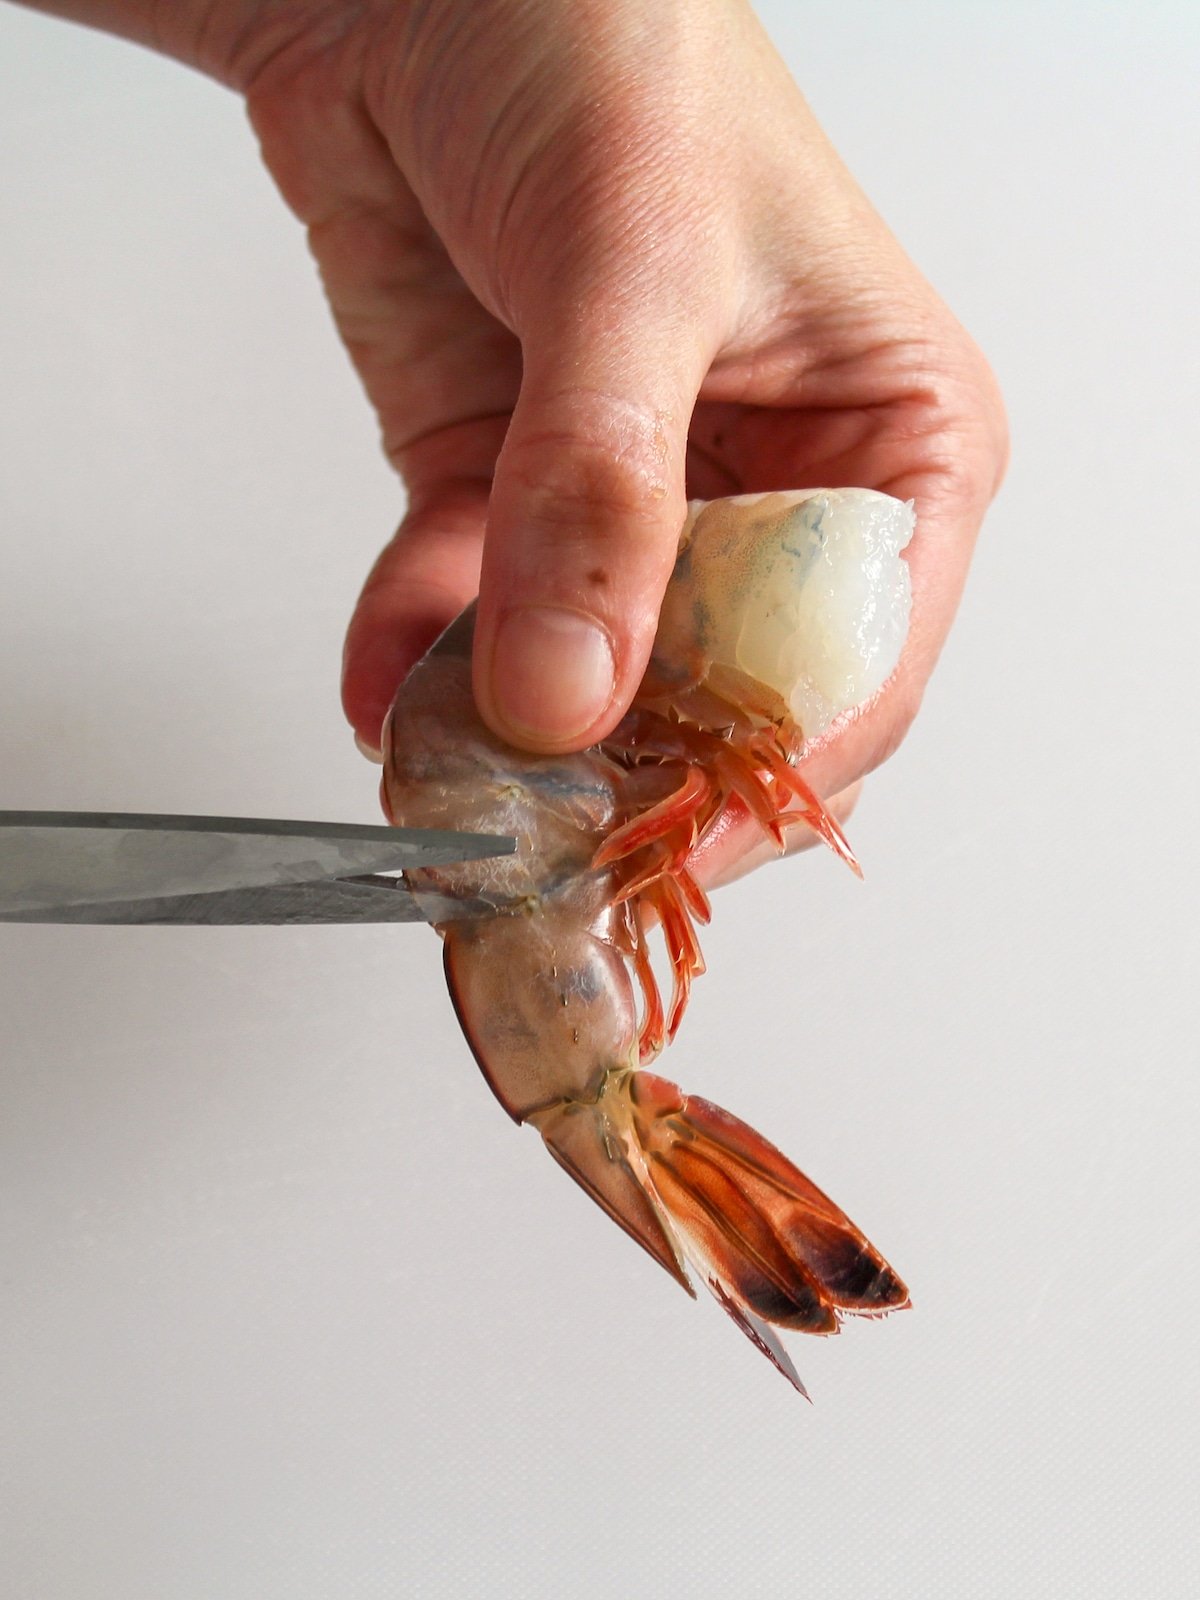 Using kitchen shears to remove the shell from shrimp.